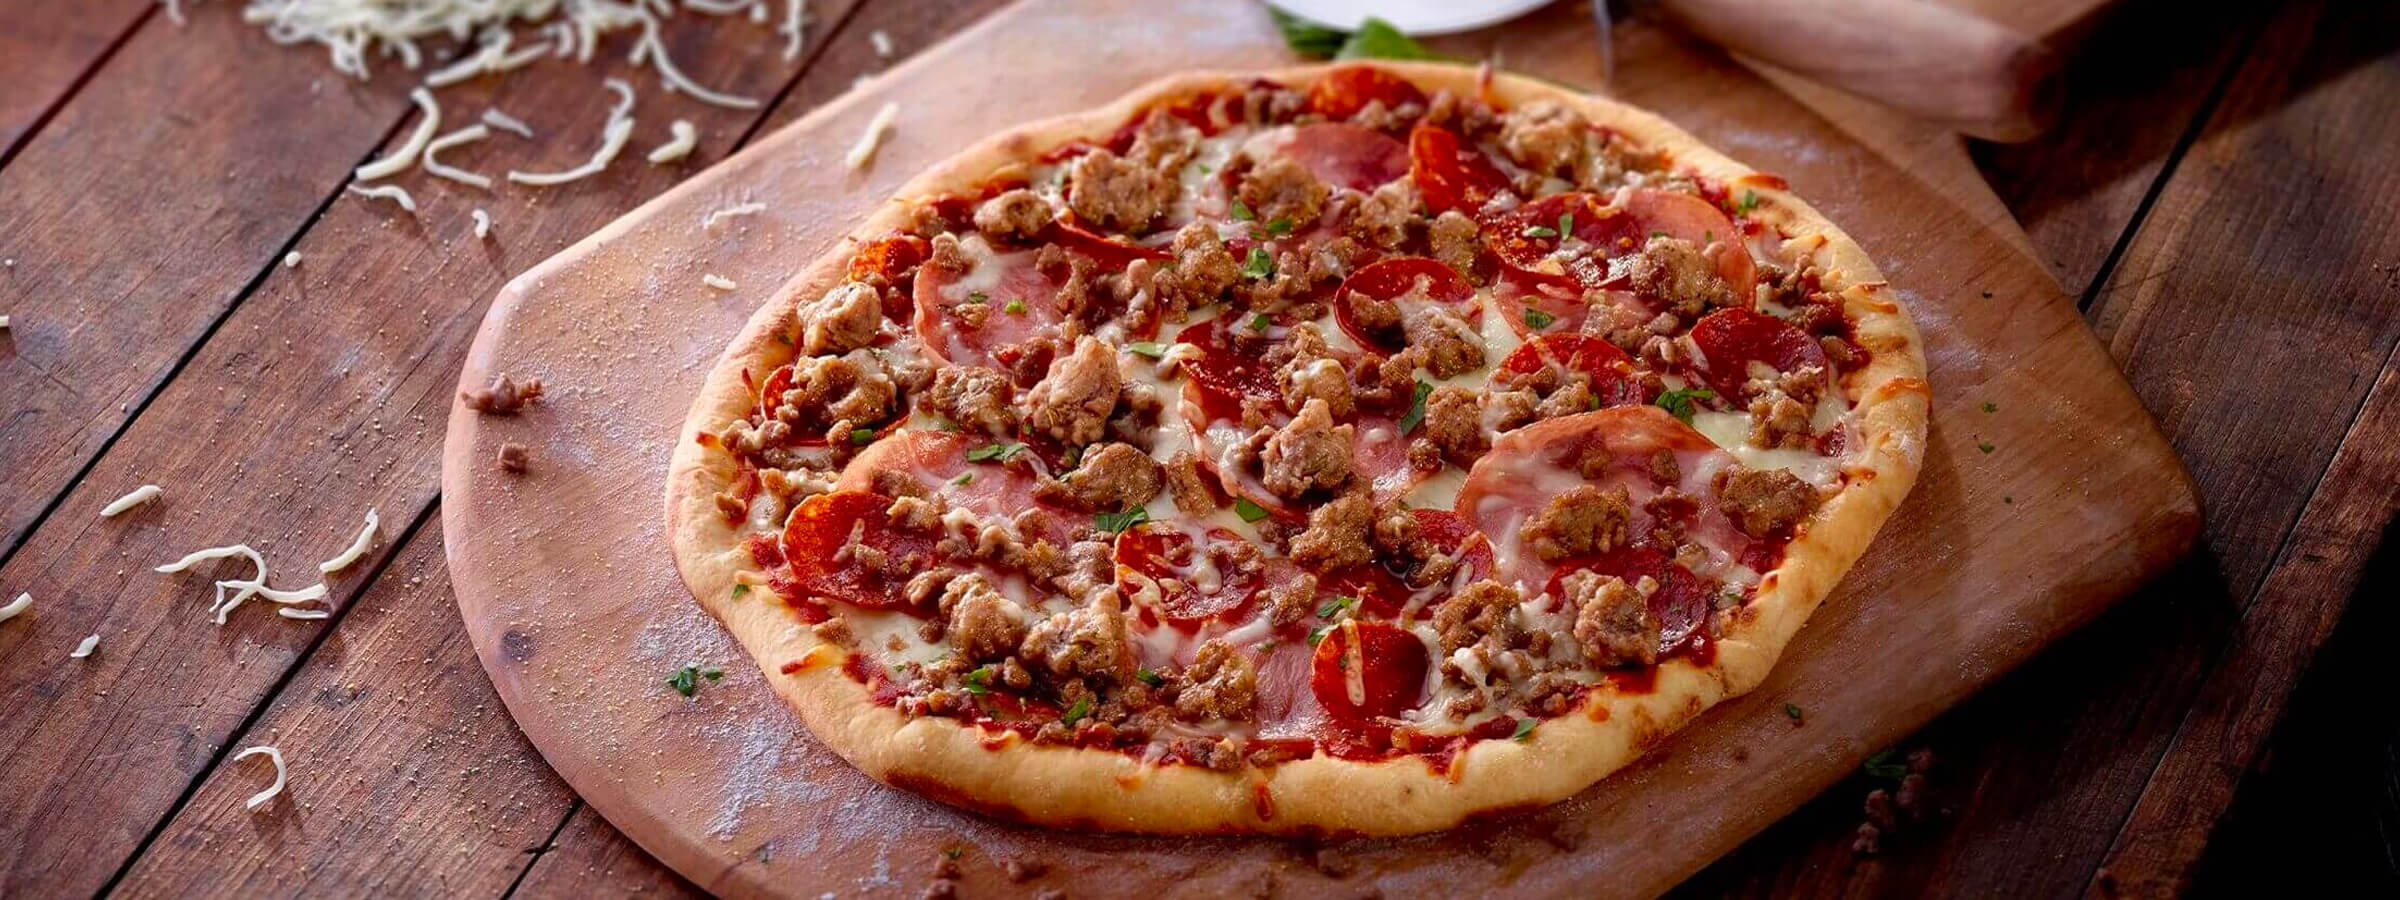 A pizza with sausage and meat